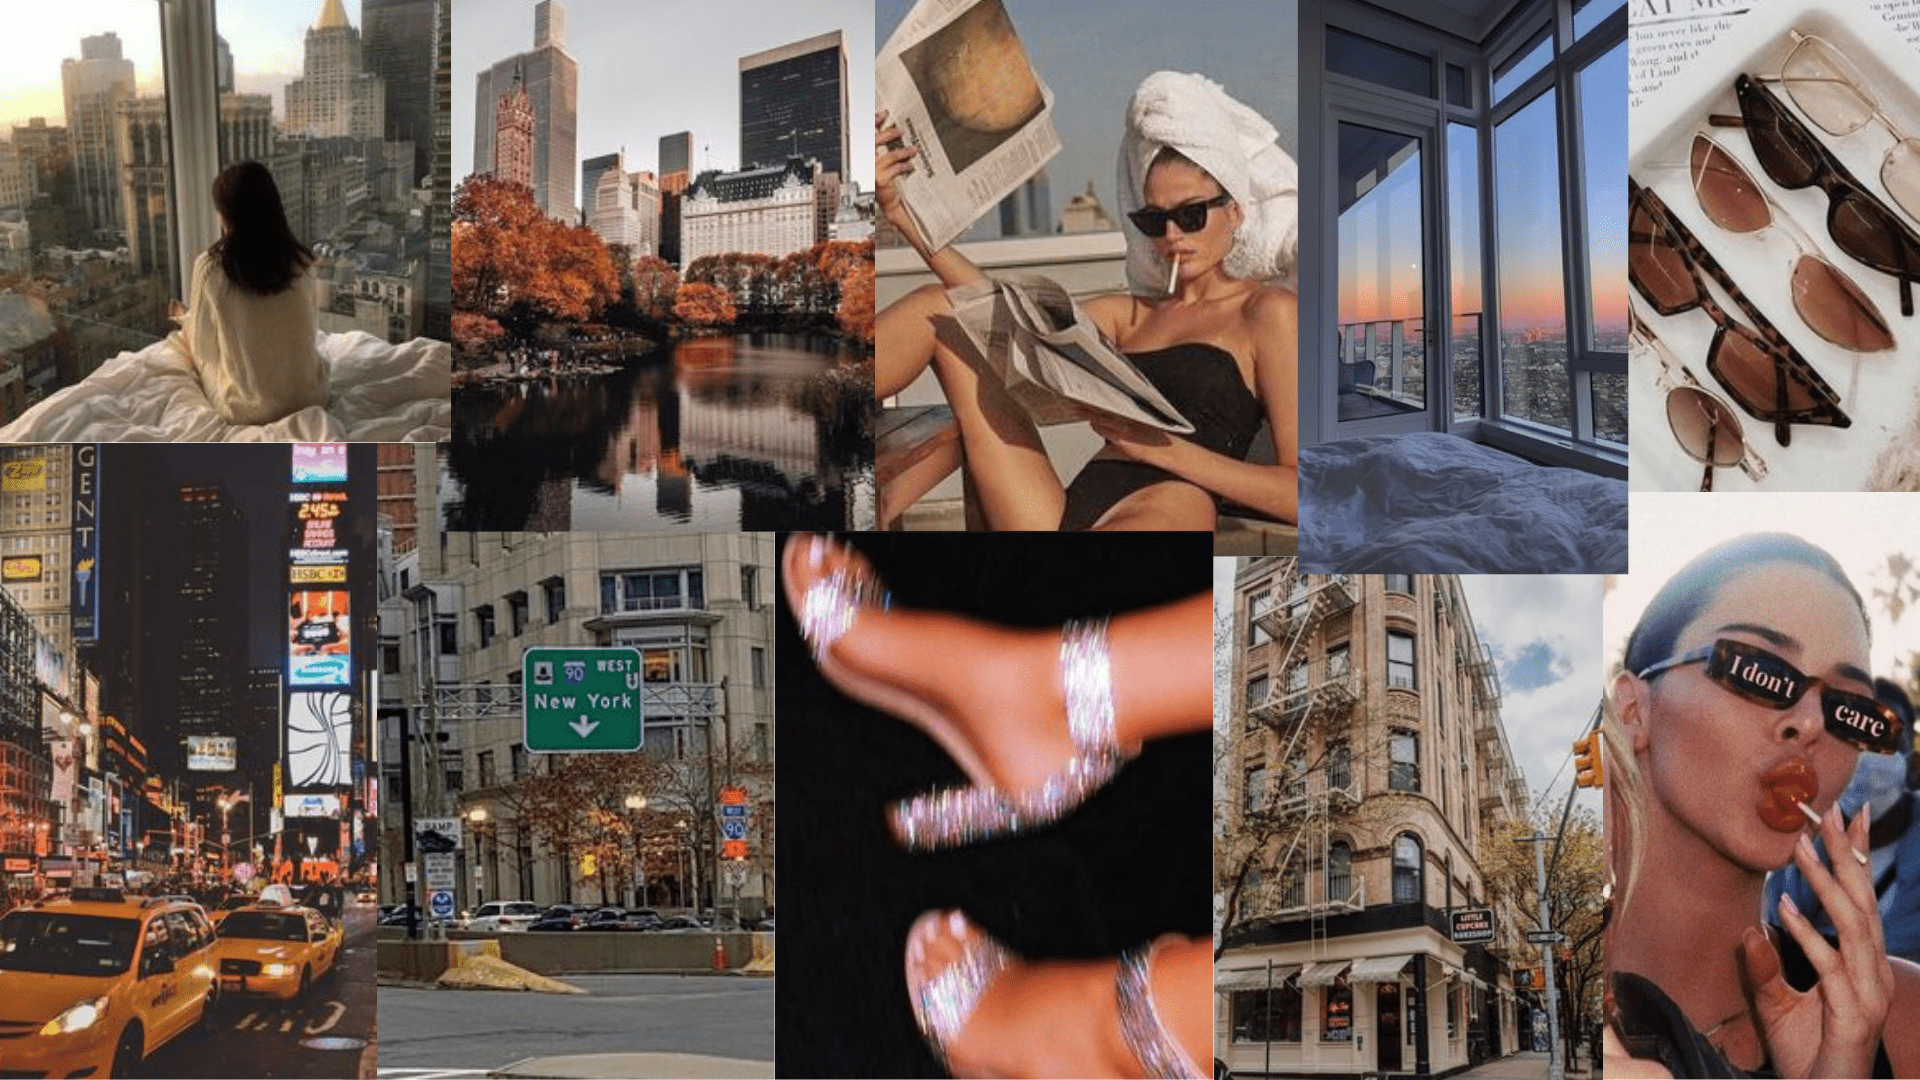 A collage of images including a woman with a towel on her head, a woman reading a newspaper, a woman with sunglasses, a city street, a sunset, and a woman licking her finger. - New York